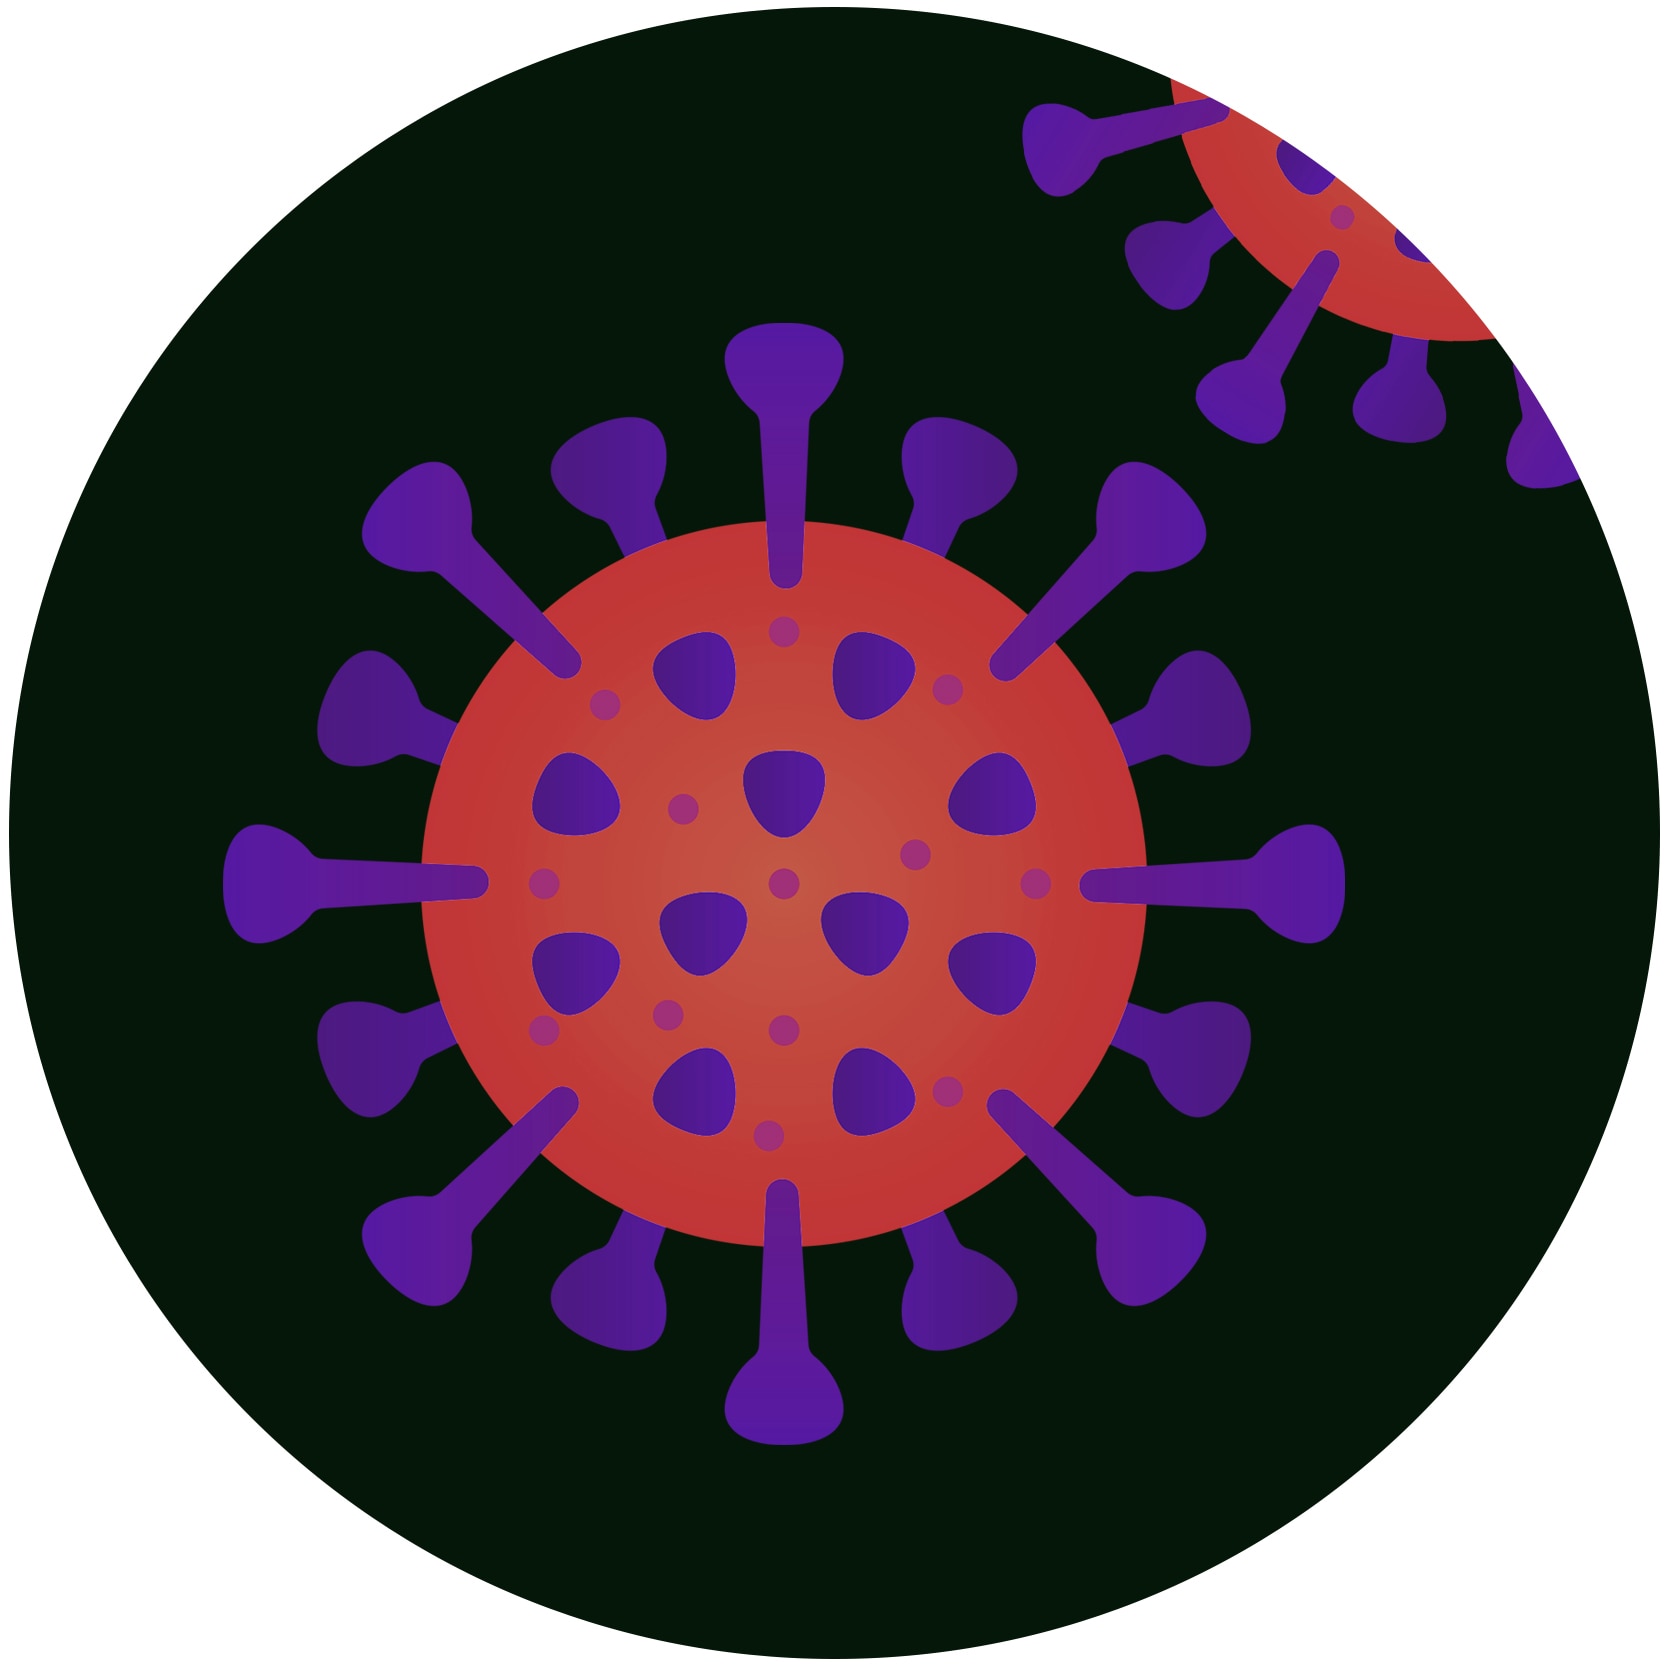 A graphic representation of the SARS-COV2 virus which causes COVID-19